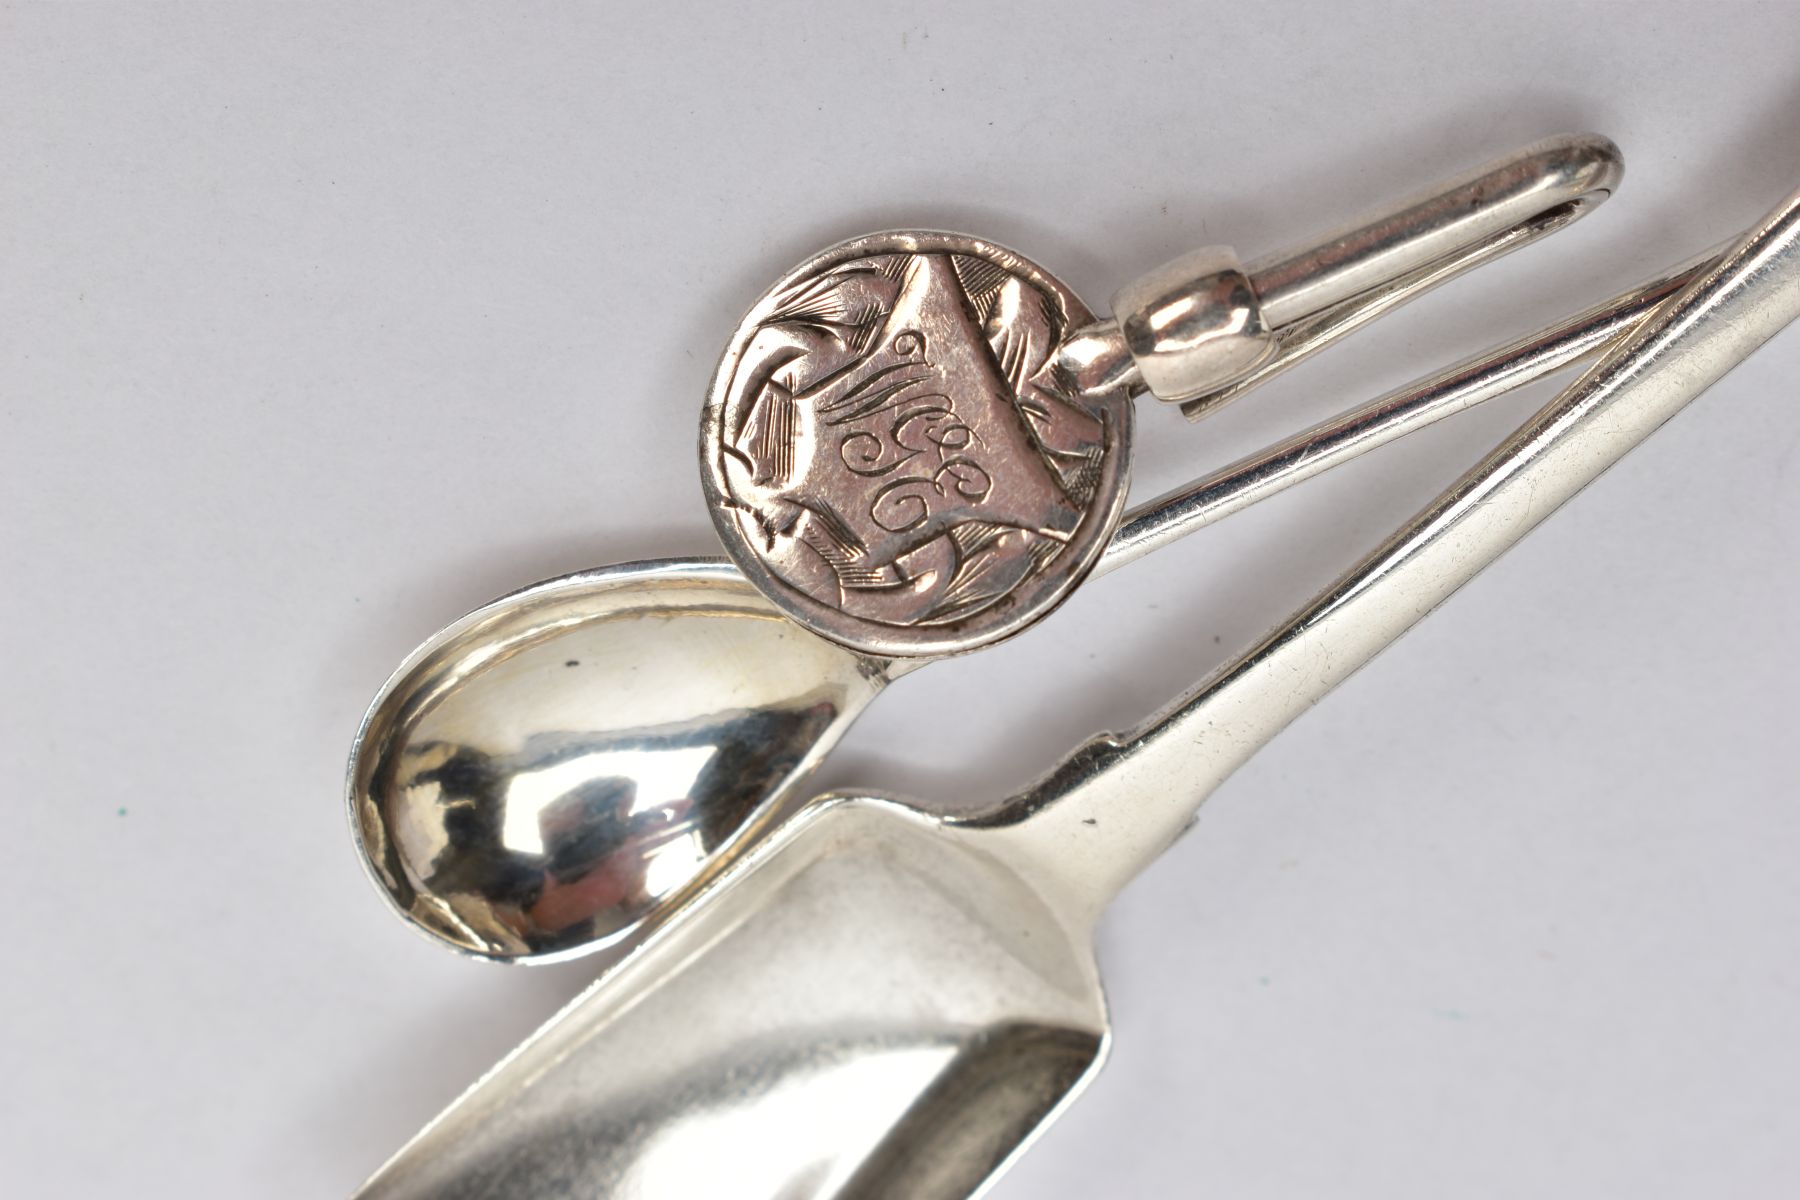 TWO SILVER SALT SPOONS AND A NAPKIN HOLDER, the first a fiddle pattern salt spoon in the form of a - Image 4 of 4